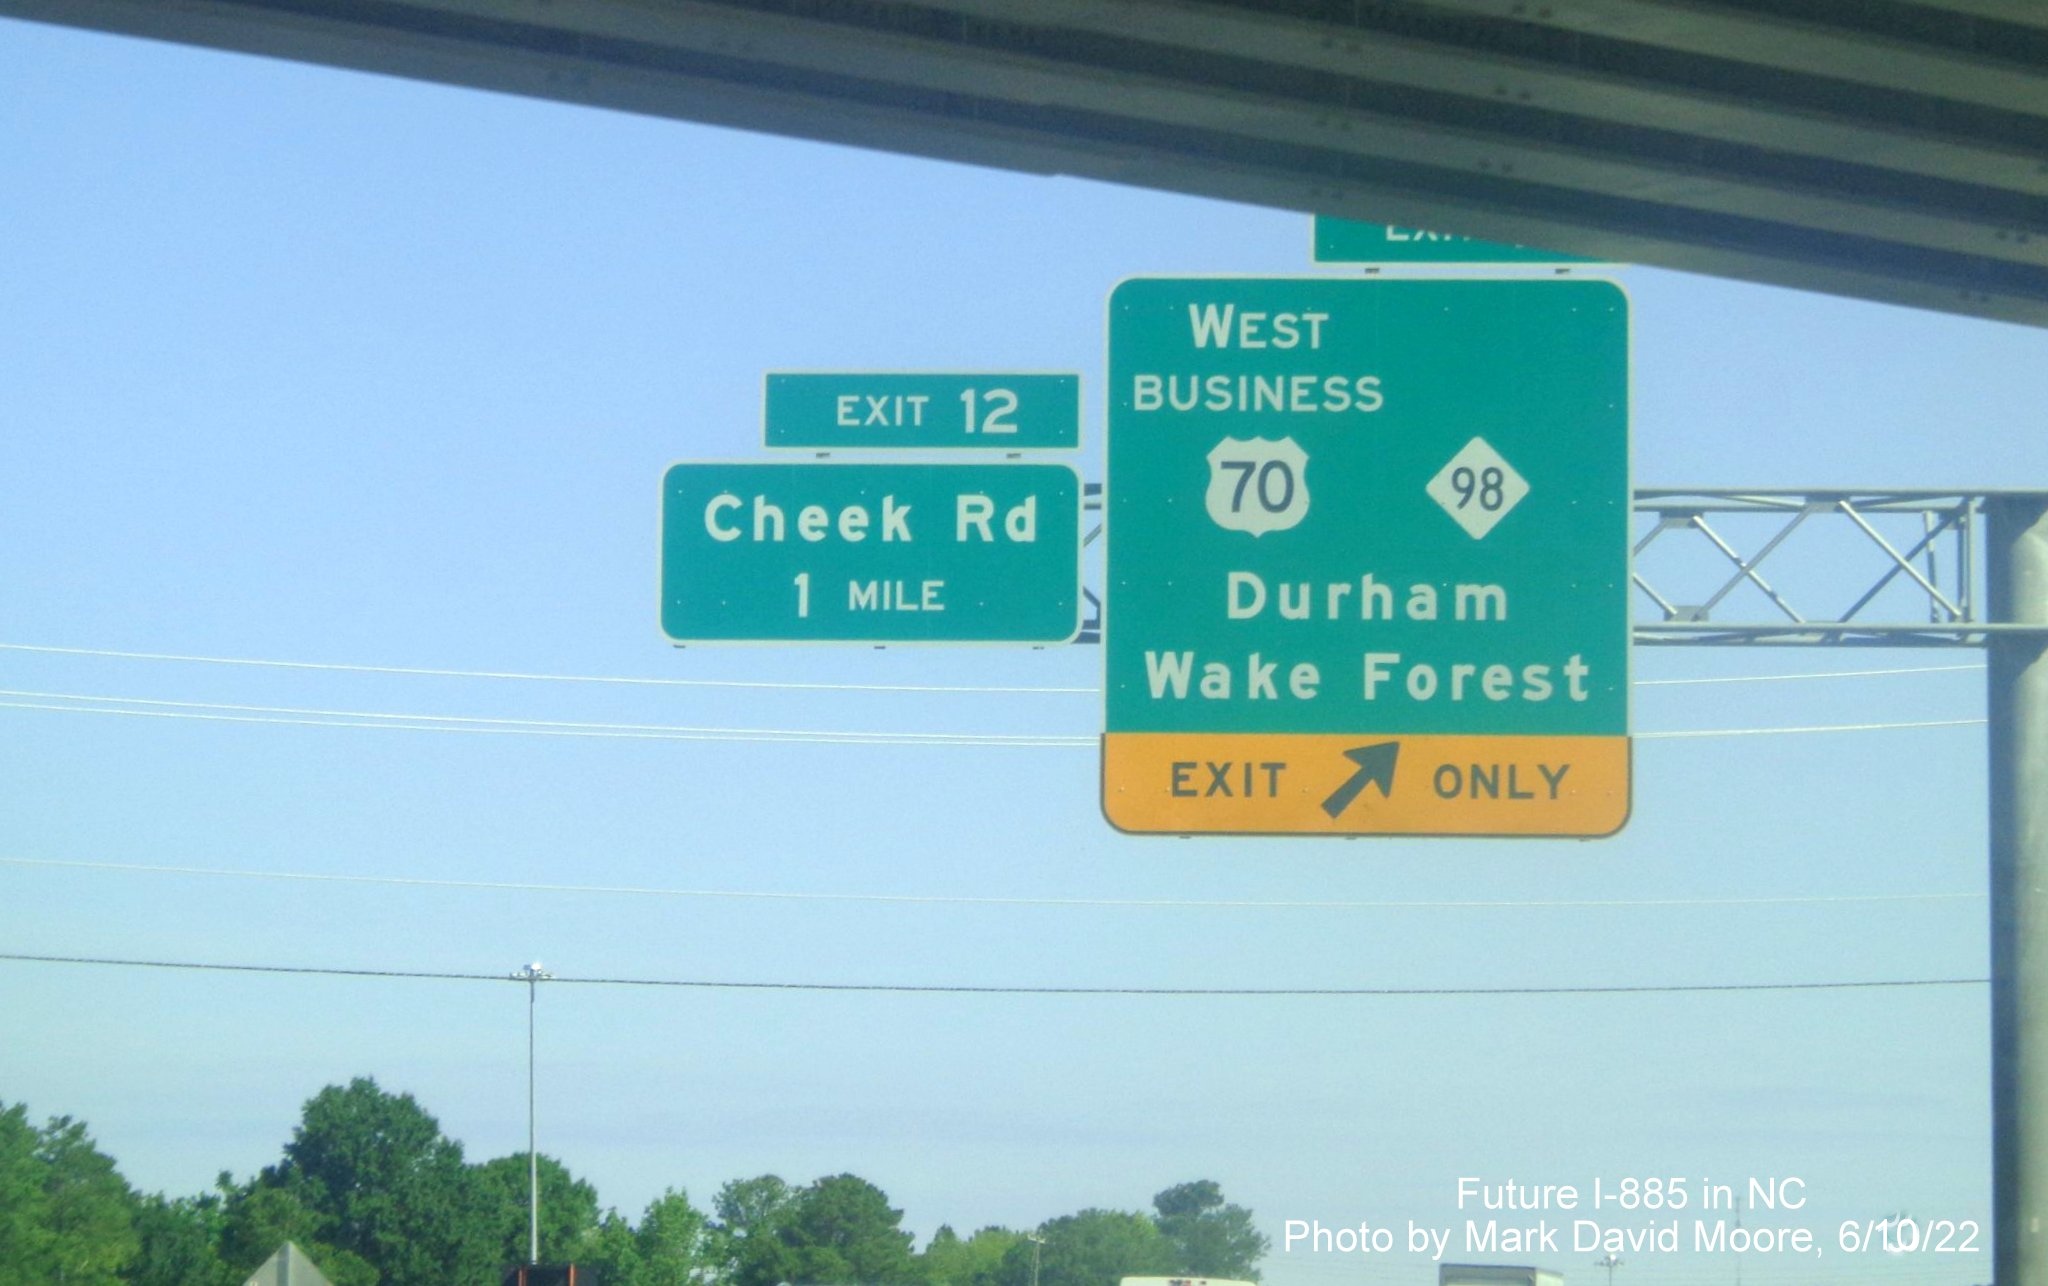 Image of 1 mile advance overhead sign for Cheek Road exit
        on Future I-885 North/US 70 West in Durham, by Mark David Moore June 2022